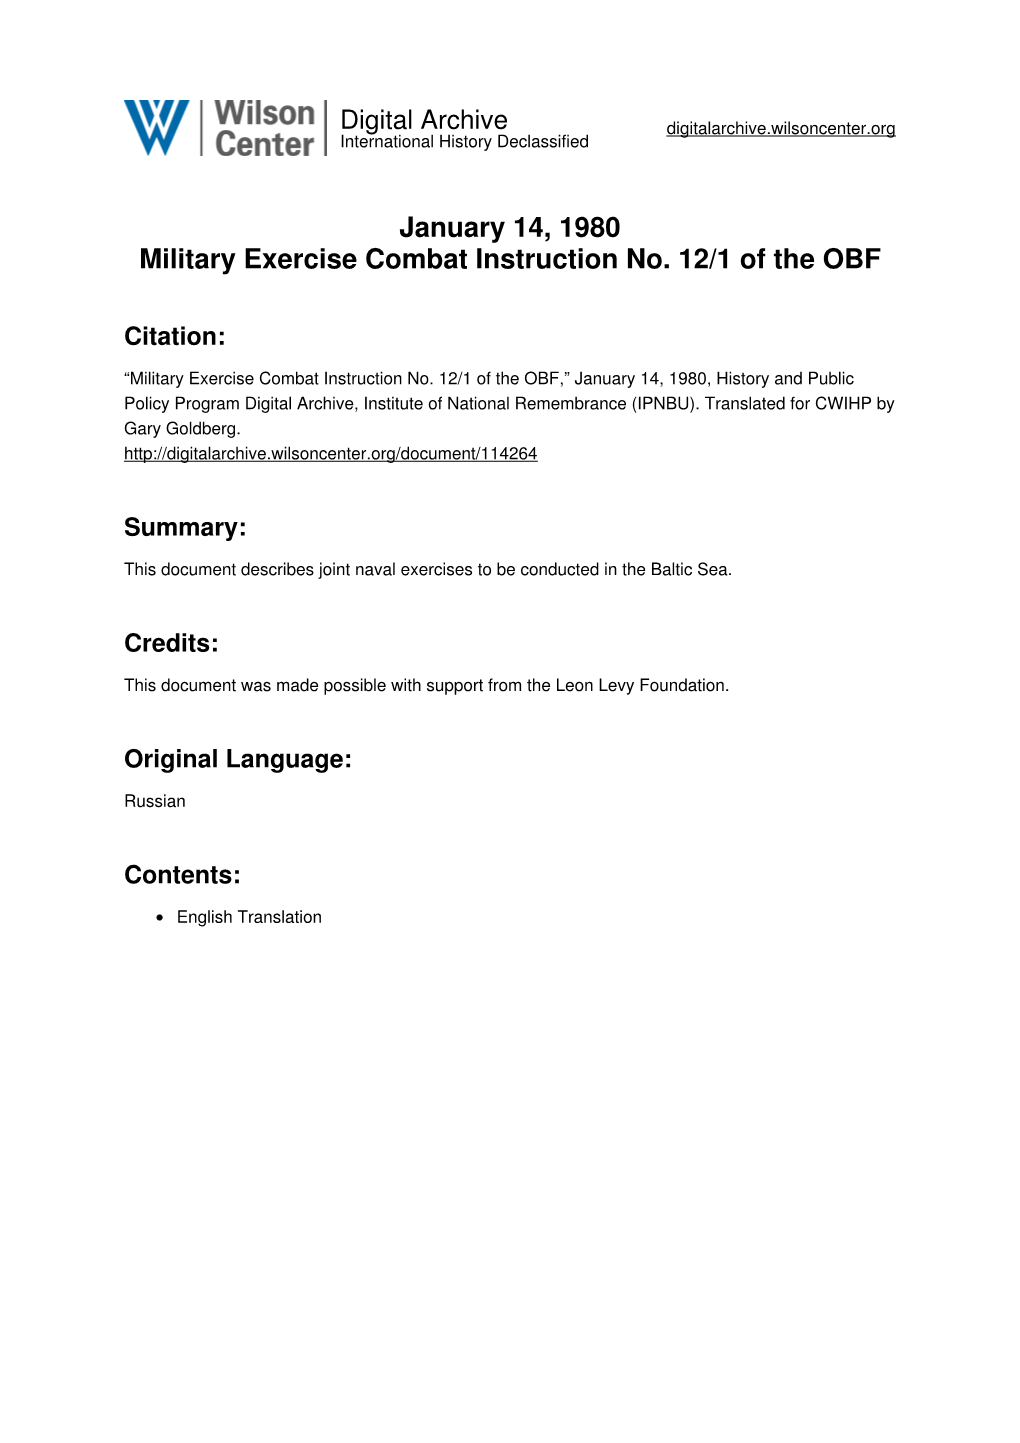 January 14, 1980 Military Exercise Combat Instruction No. 12/1 of the OBF